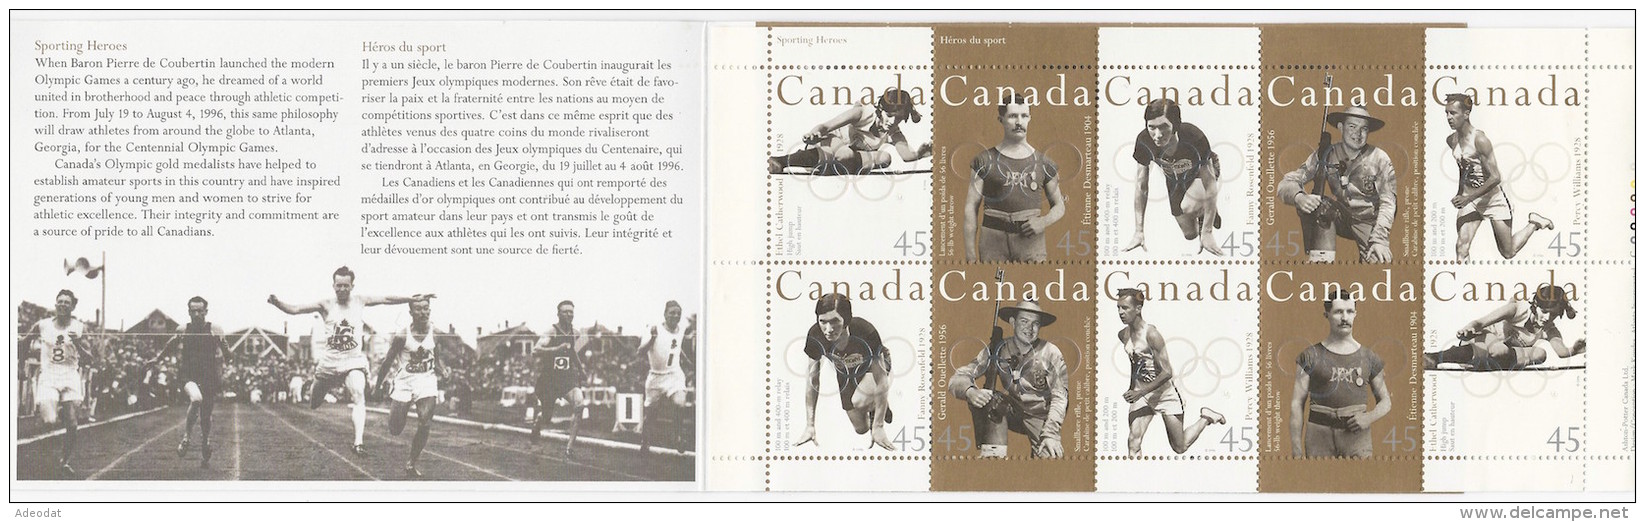 CANADA 1996 CANADIAN OLYMPIC GOLD MEDALISTS SCOTT 1612b BOOKLET PANE OF 10 VALUE US  $11.25 - Pagine Del Libretto